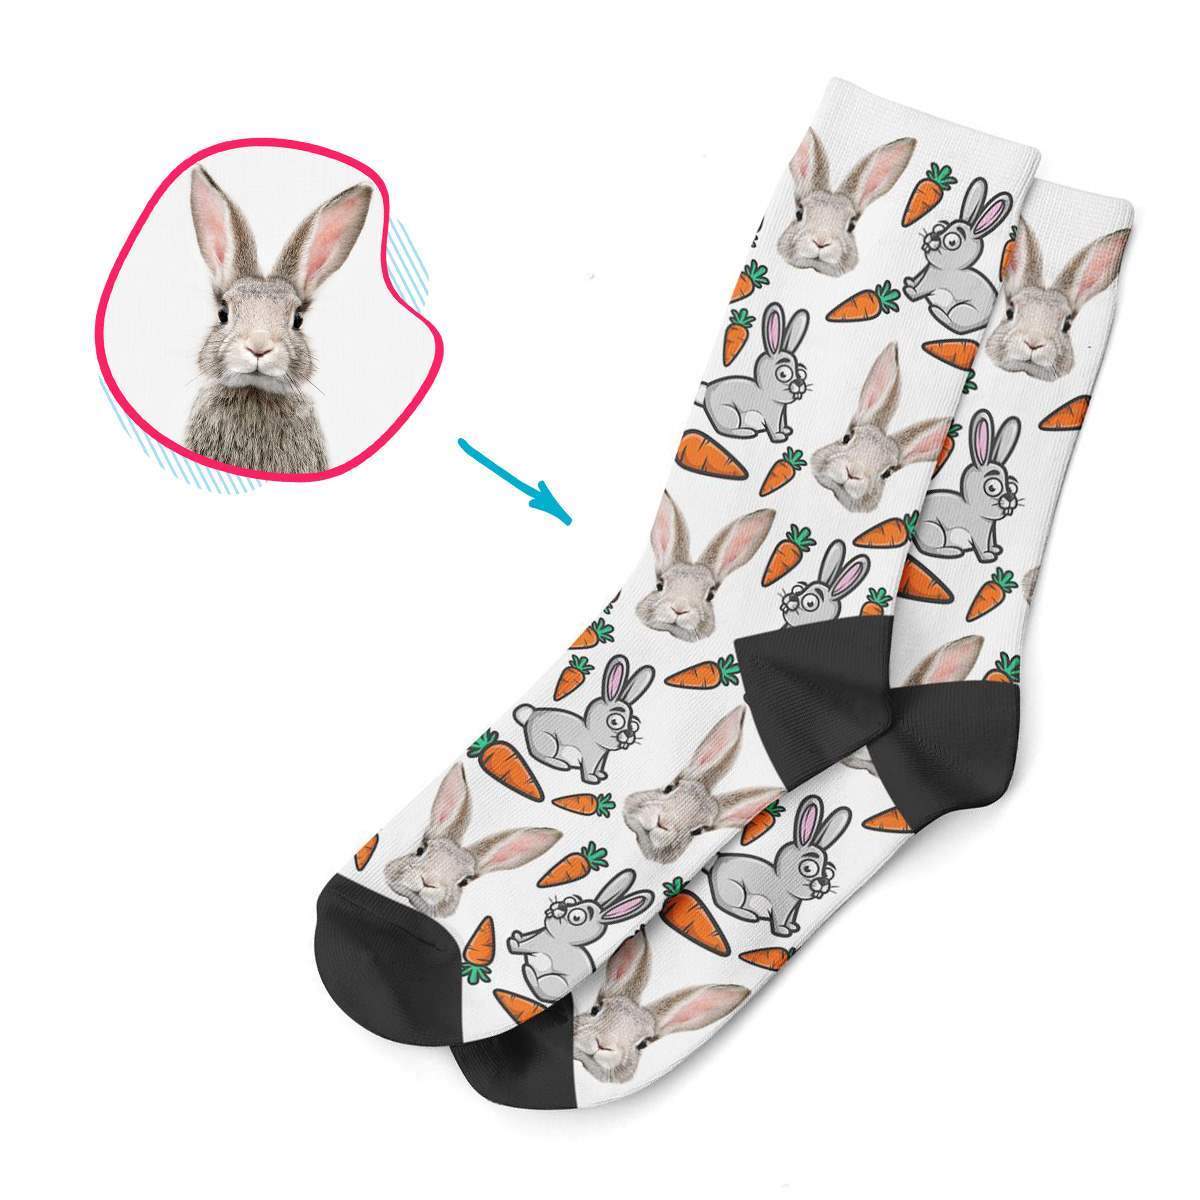 white Bunny socks personalized with photo of face printed on them